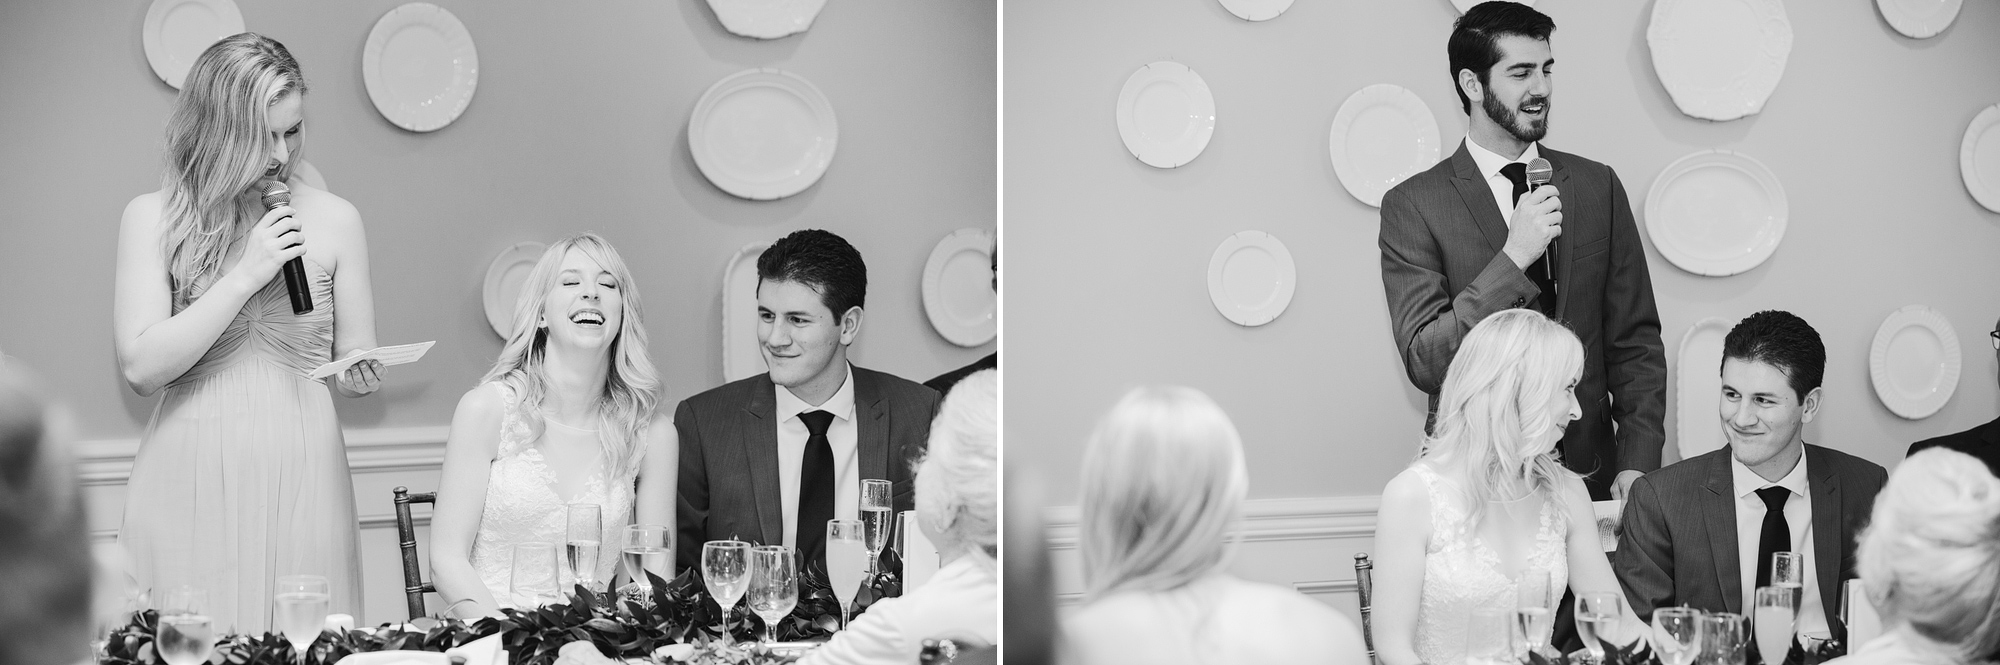 The maid of honor and best man's toasts. 